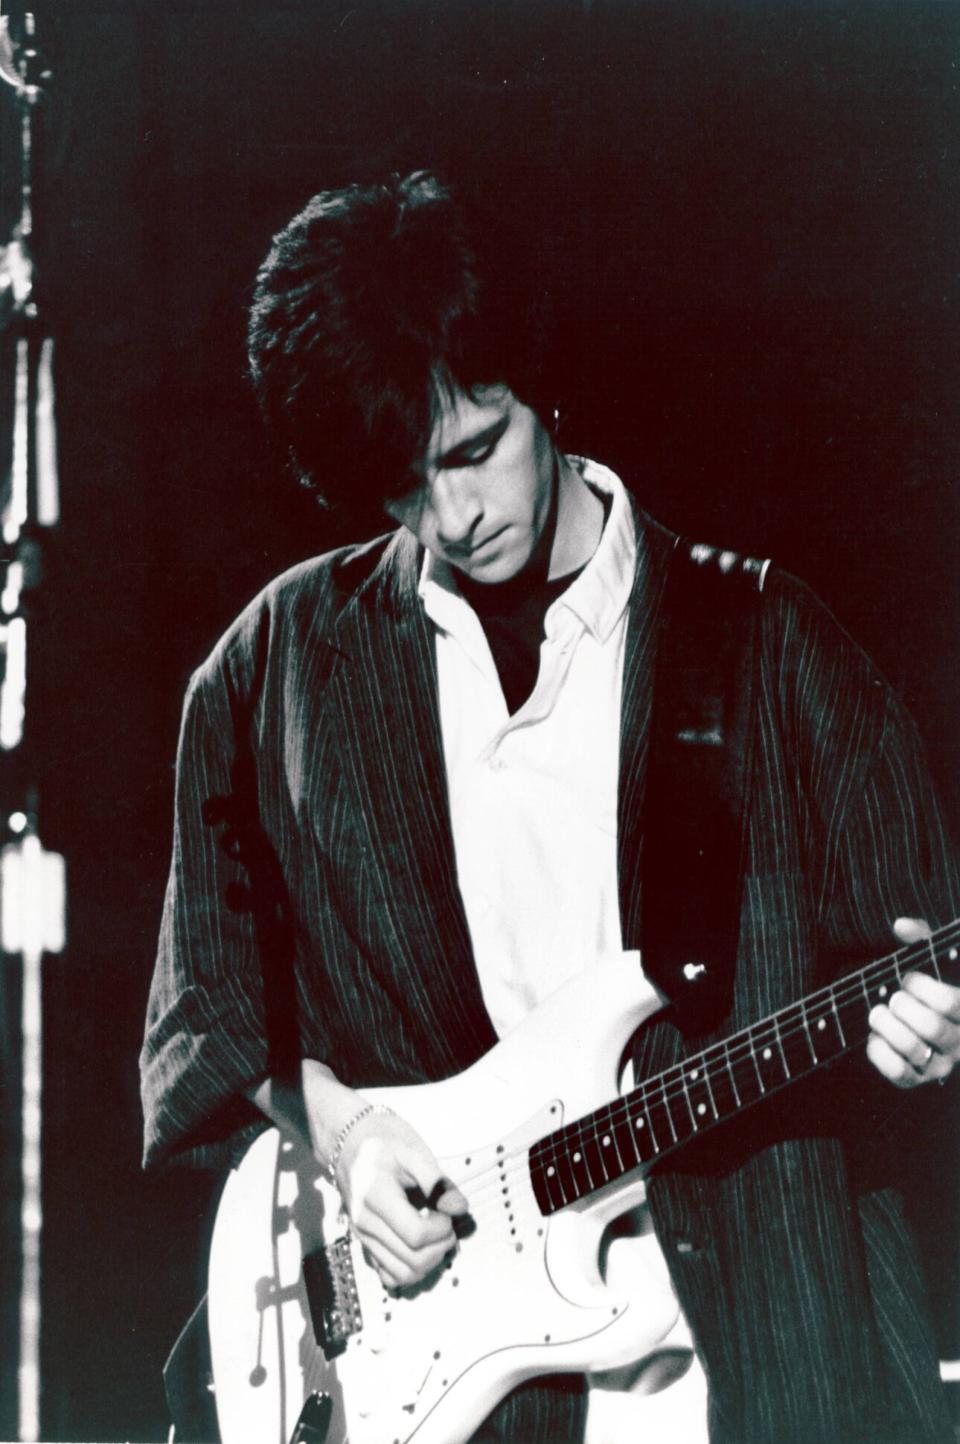 Playing his Fender Stratocaster, 1980s. (Credit: Donna Santisi/Redferns)